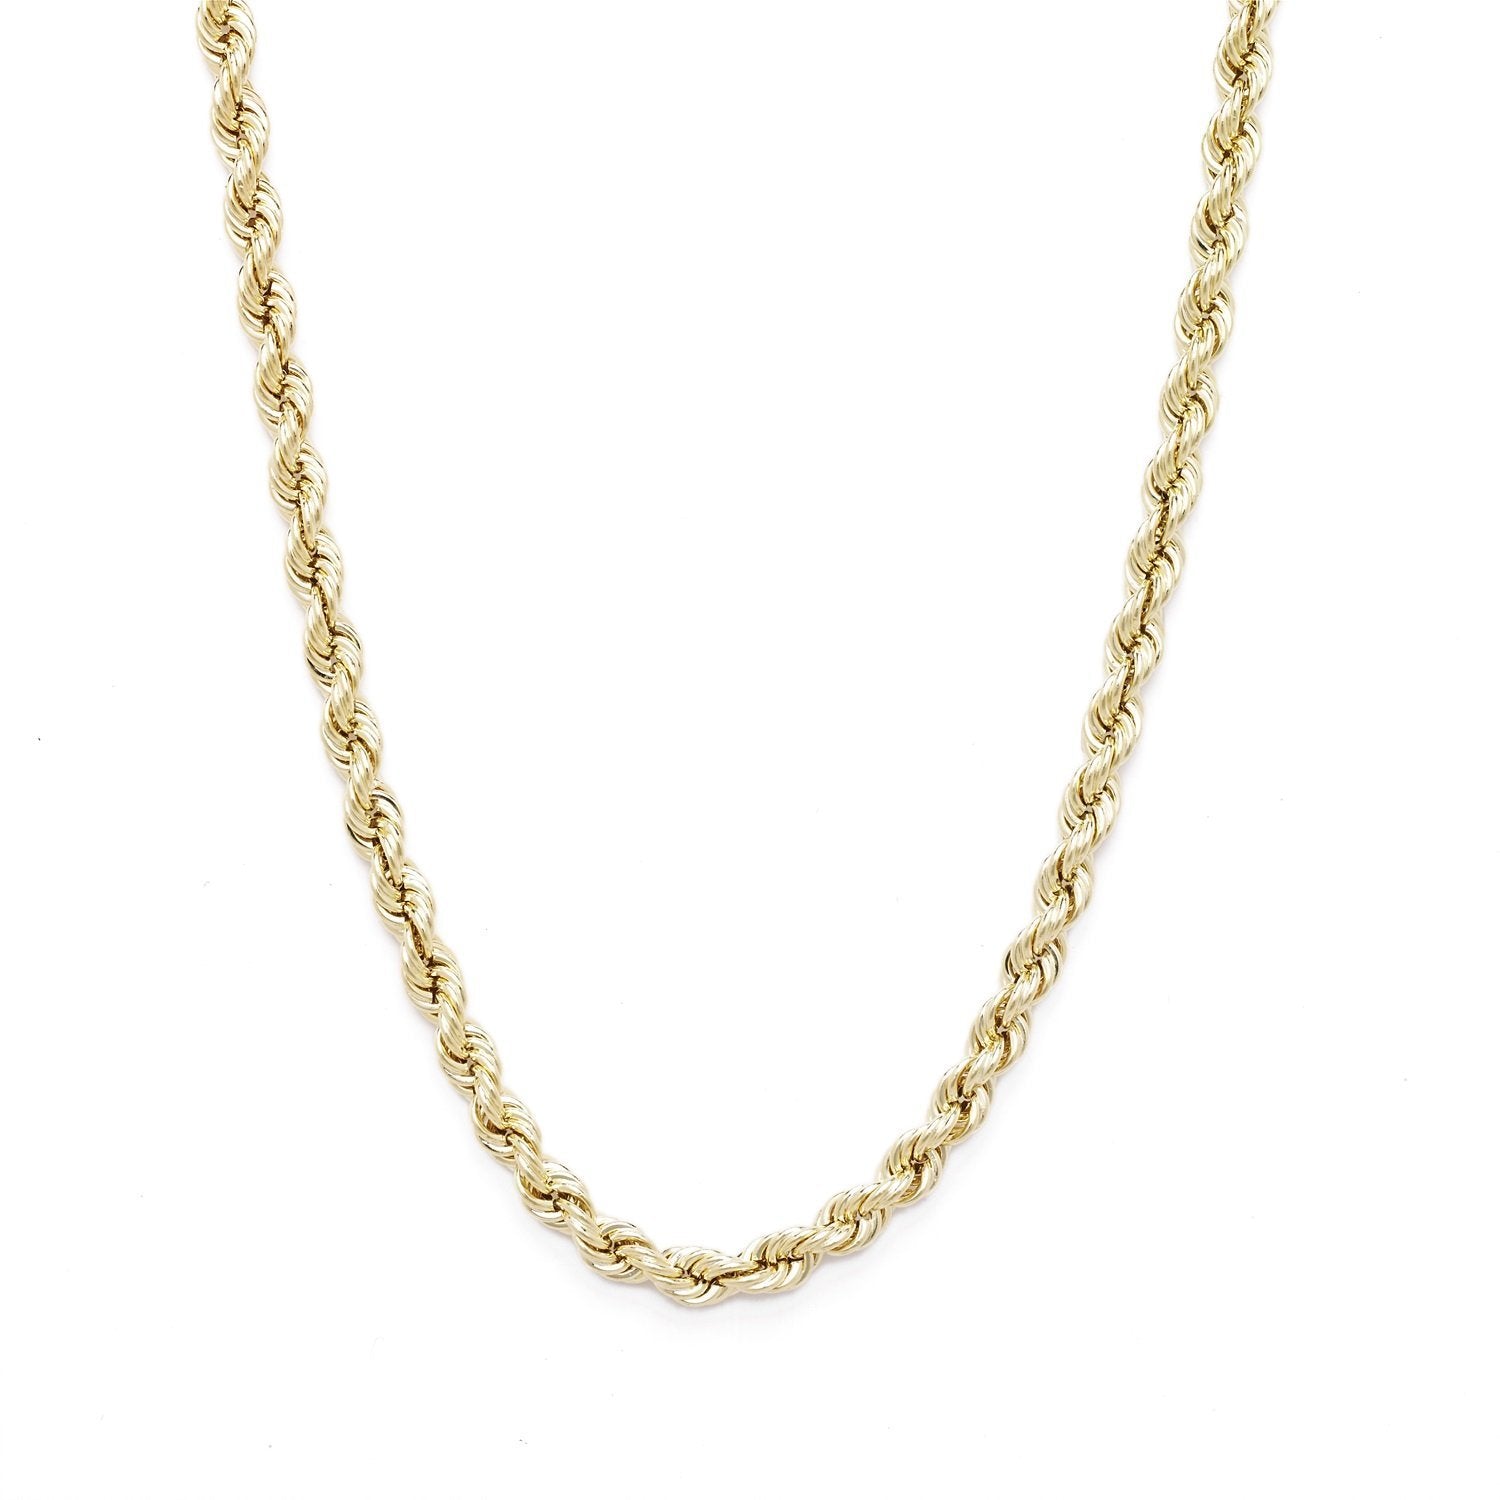 10k Yellow Gold Hollow Rope Chain Necklace w/ Lobster Claw Clasp, 3mm